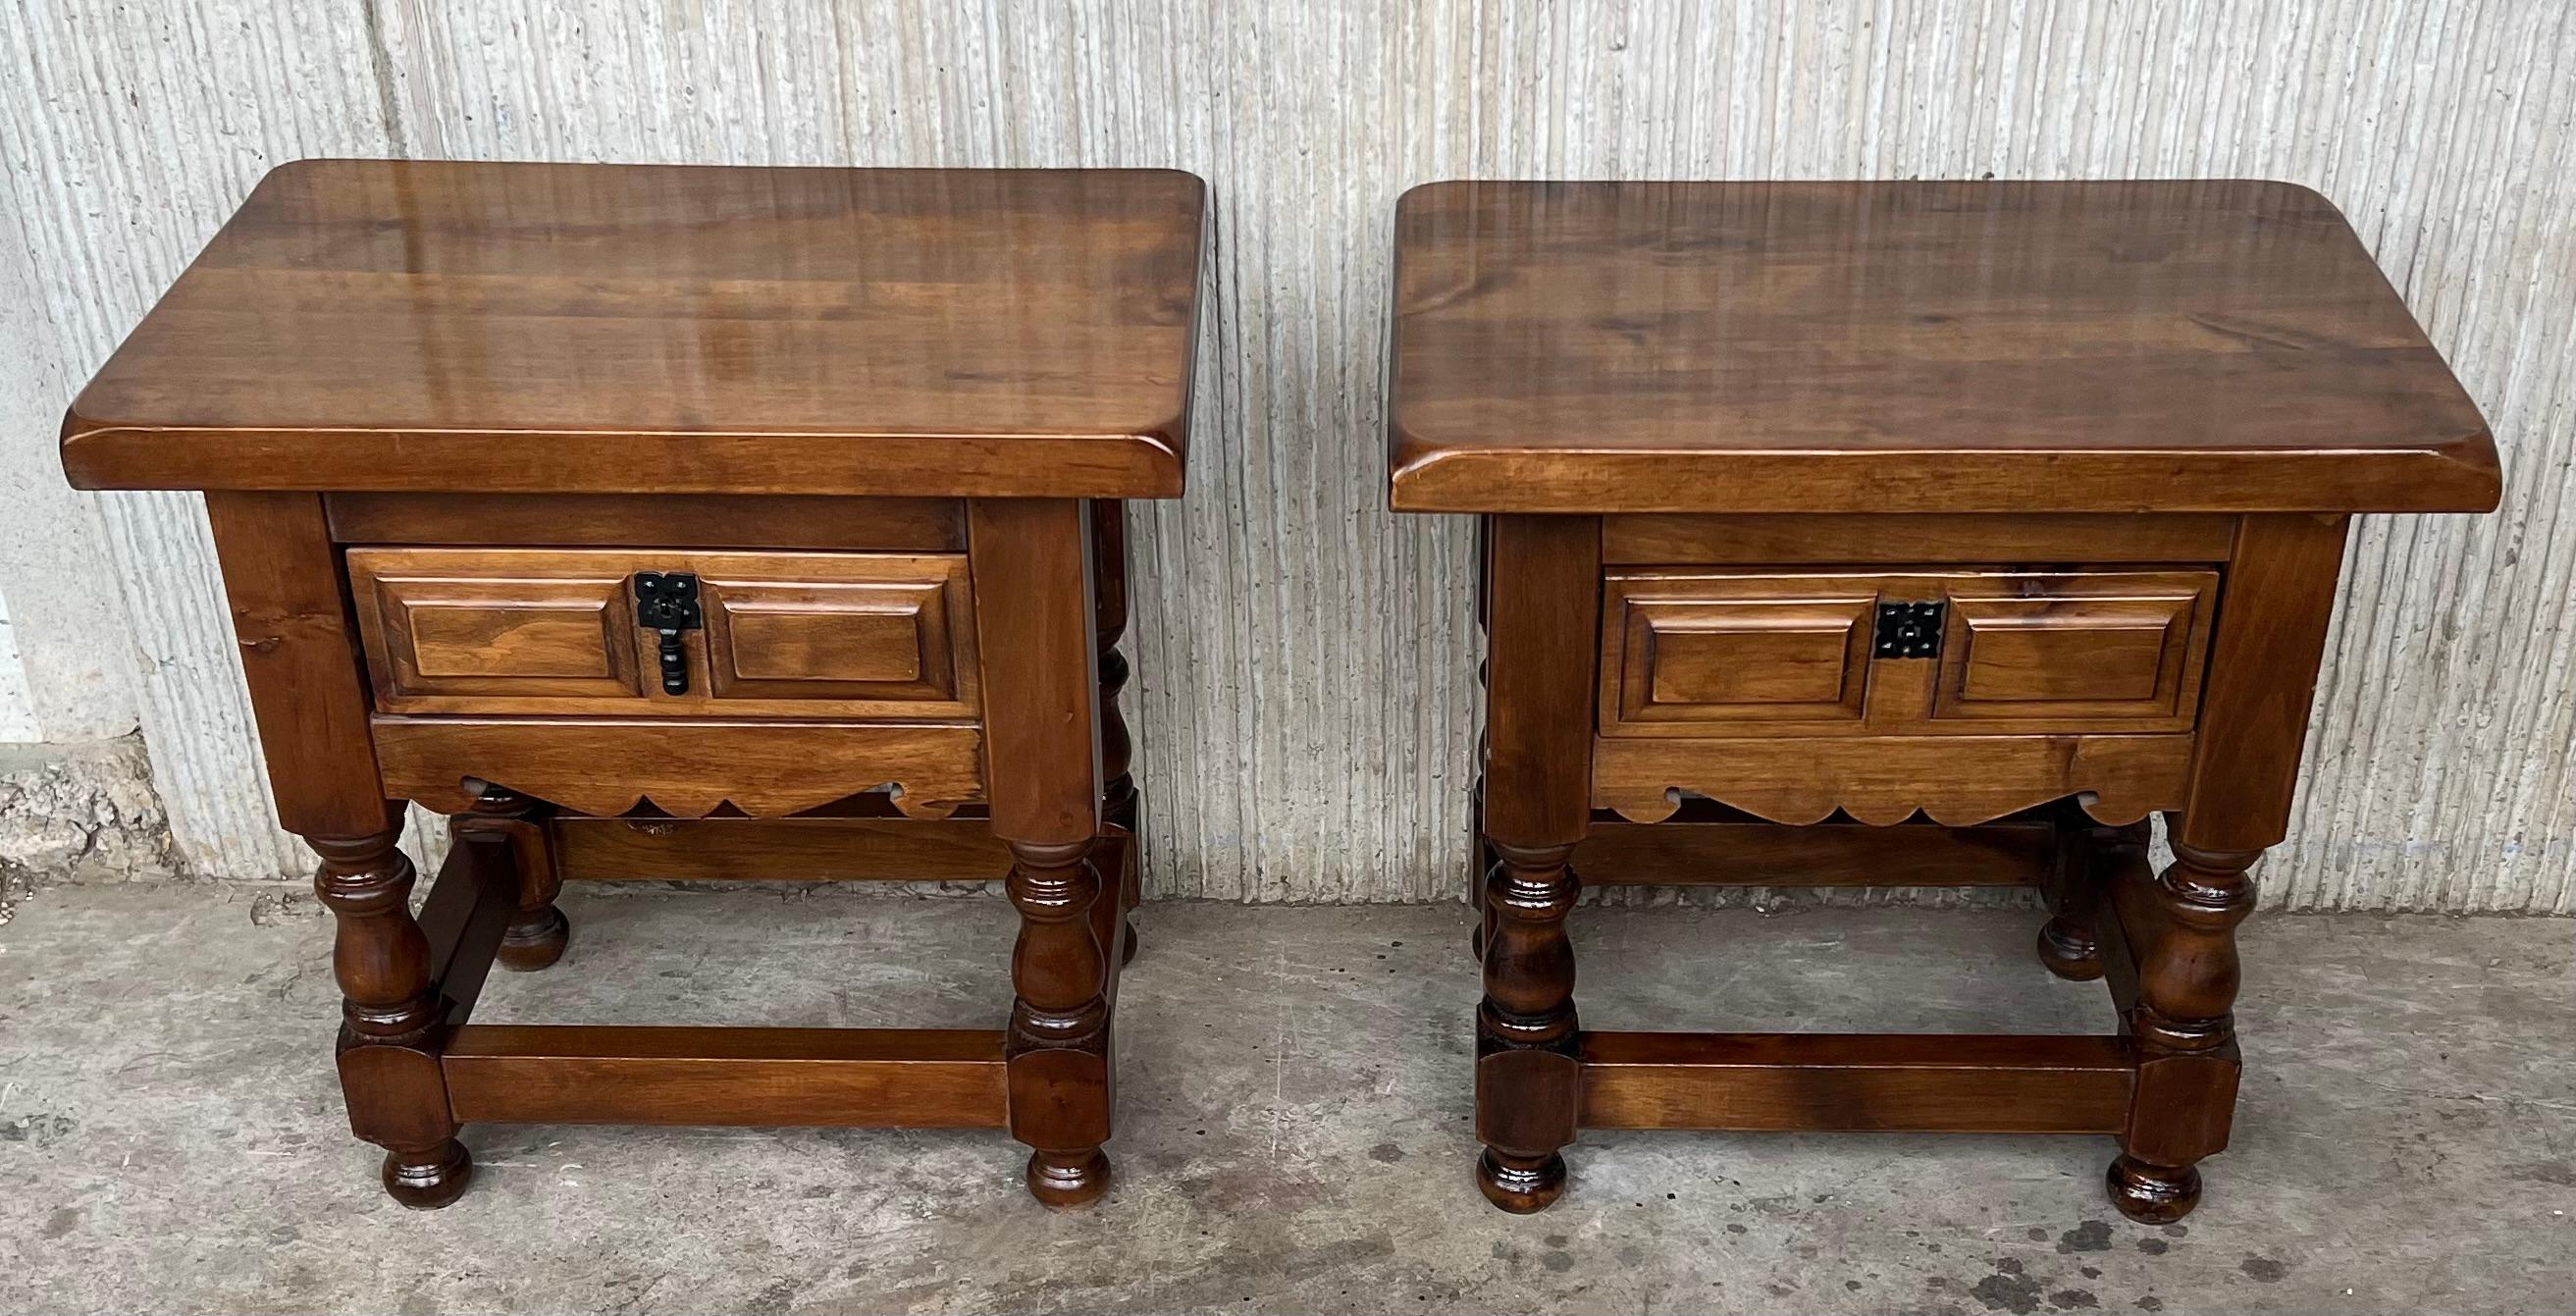 20th century pair of Spanish nightstands in solid walnut with carved drawer and iron hardware.
Beautiful tables that you can use like a nightstands or side tables, end tables, or table lamp.